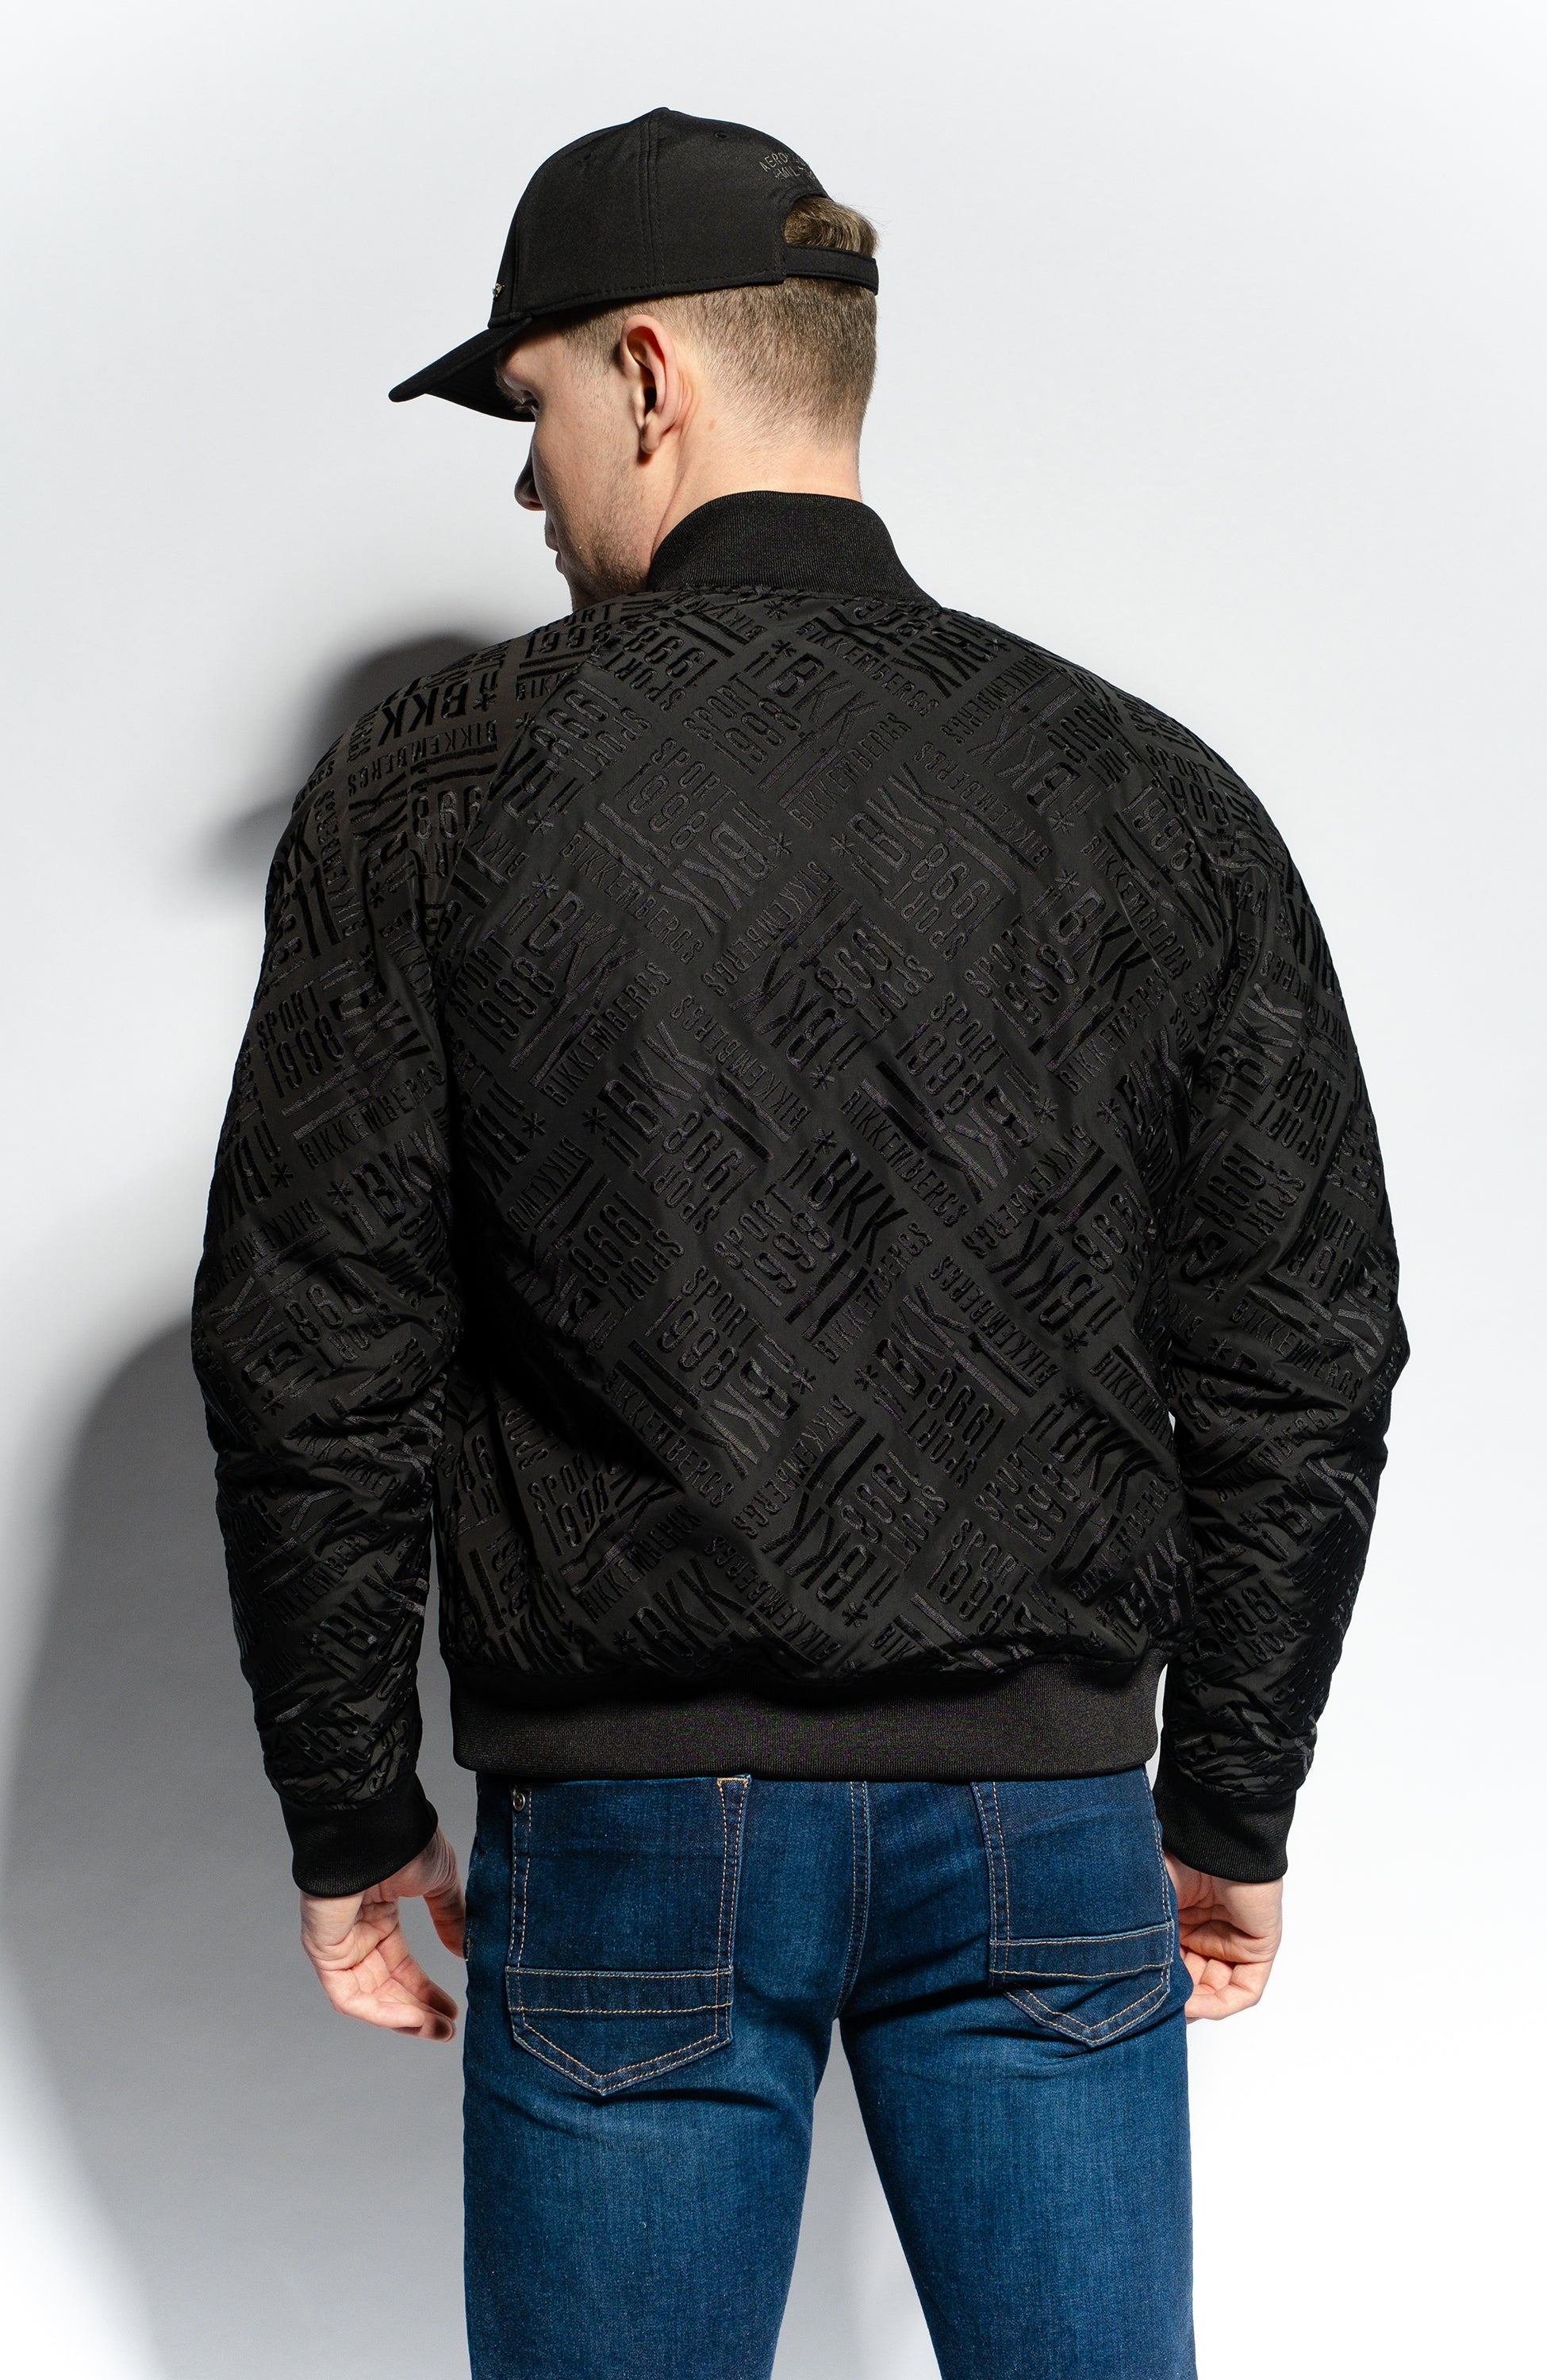 Embroidered pattern jacket